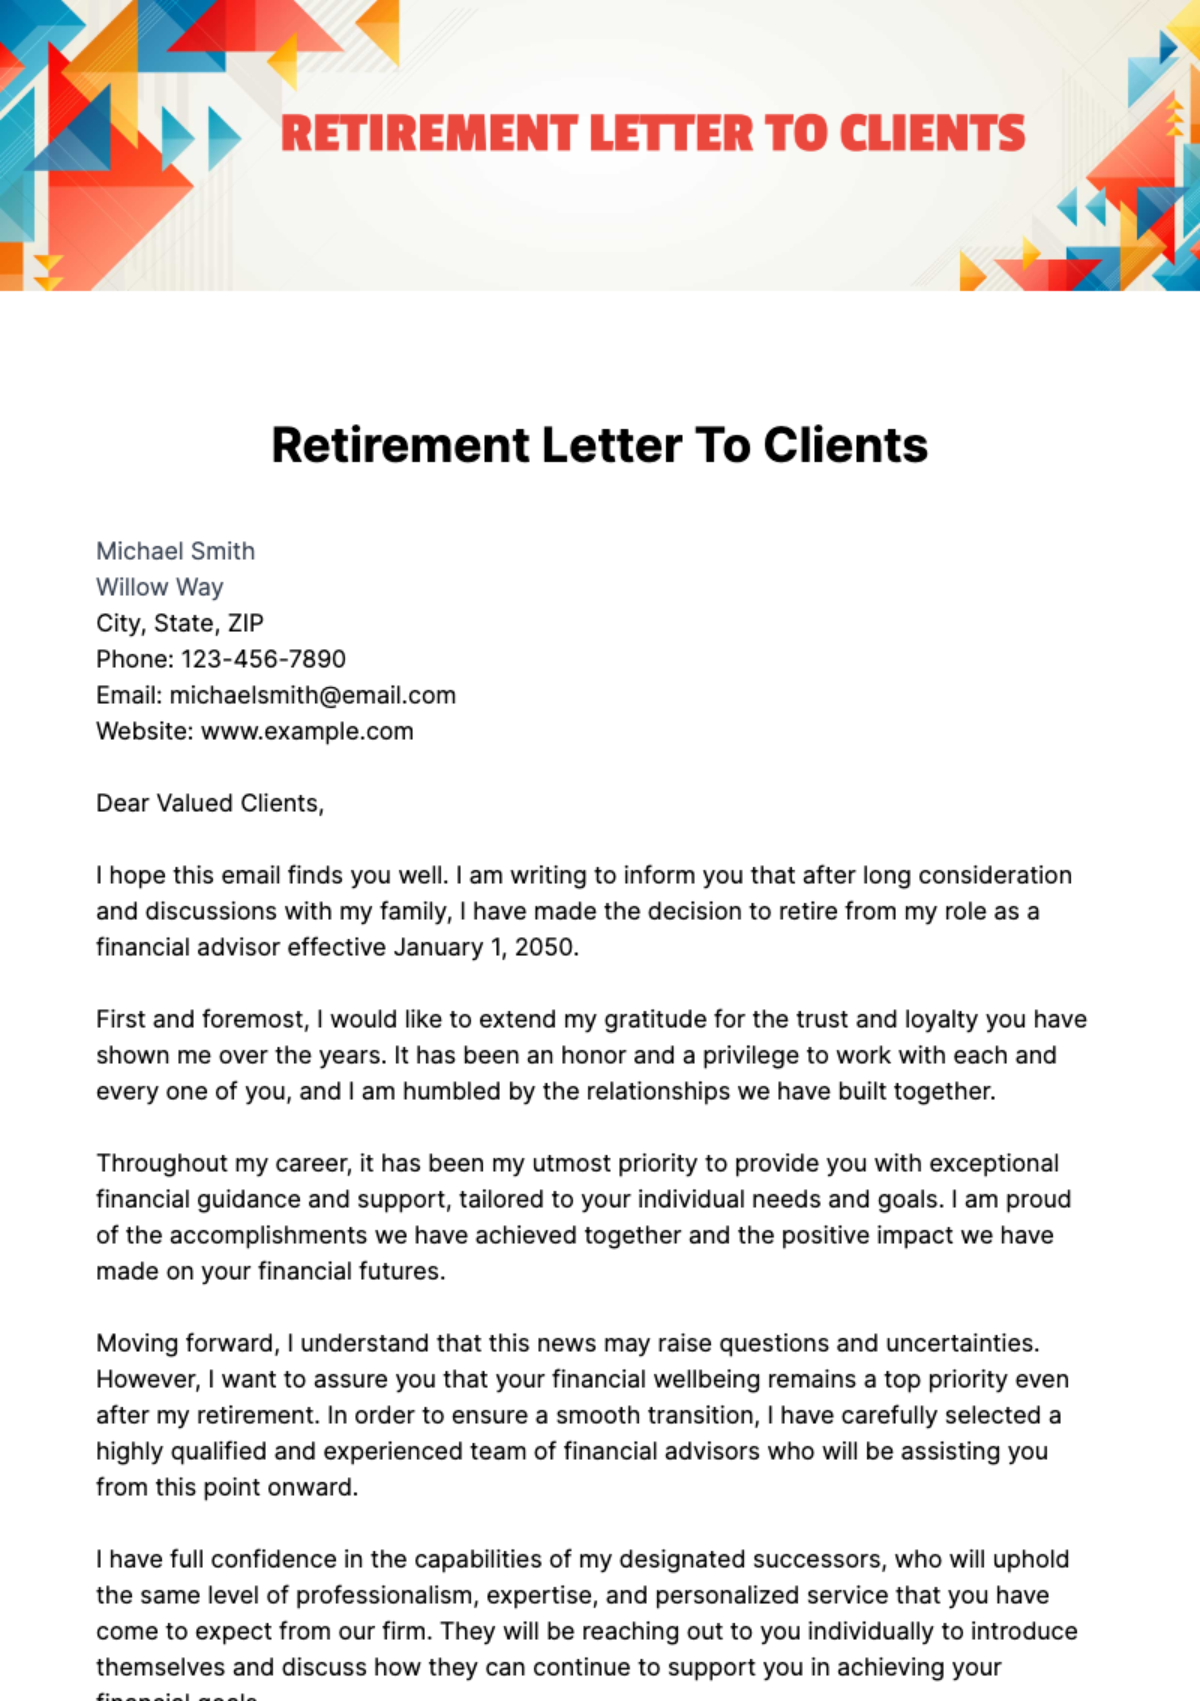 Retirement Letter To Clients Template